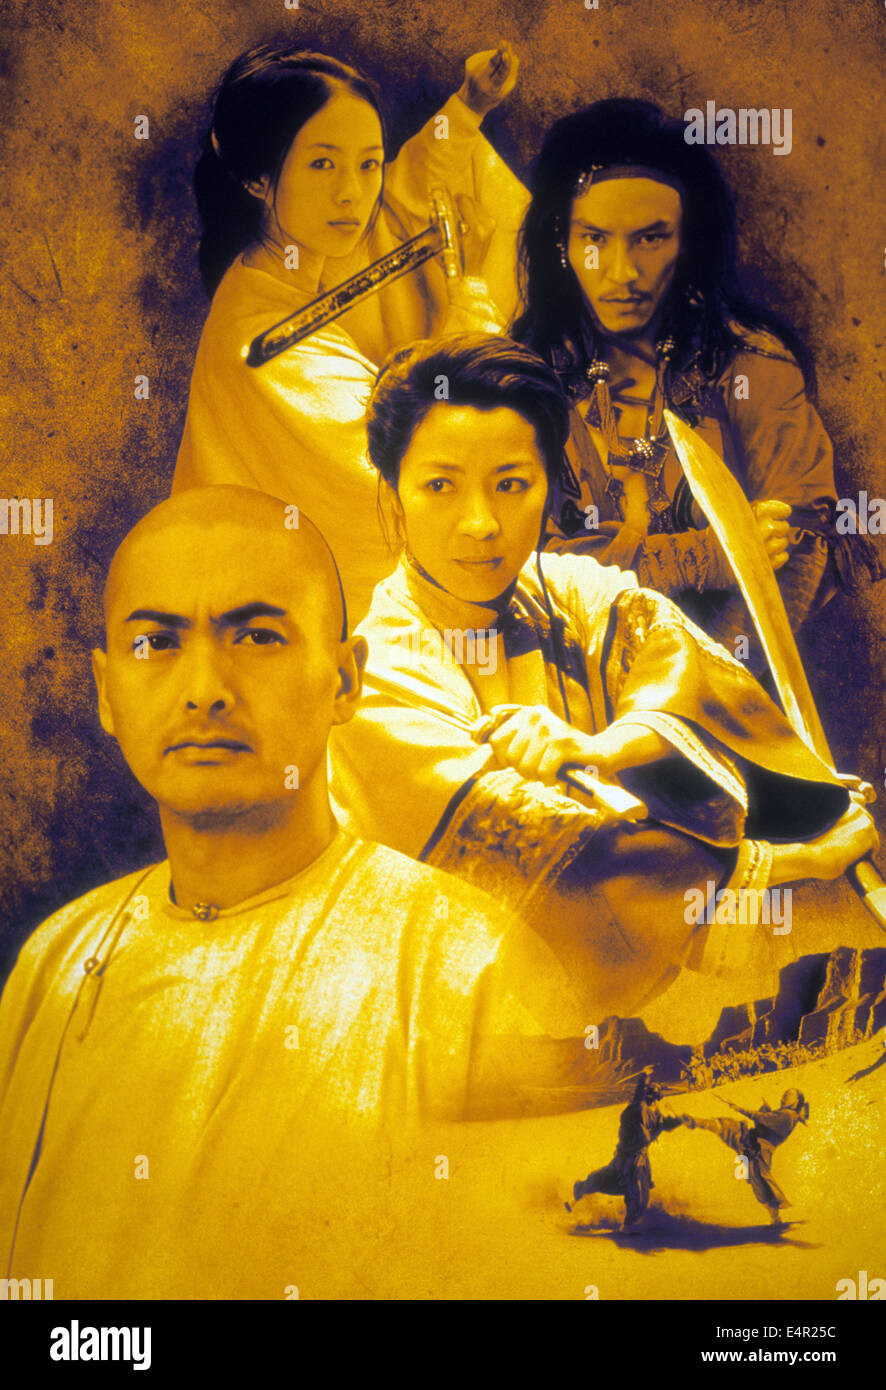 CROUCHING TIGER, HIDDEN DRAGON  Artwork for 2000 Columbia Asia film with Yun-Fat Chow (front) and Michelle Yeo (middle) Stock Photo